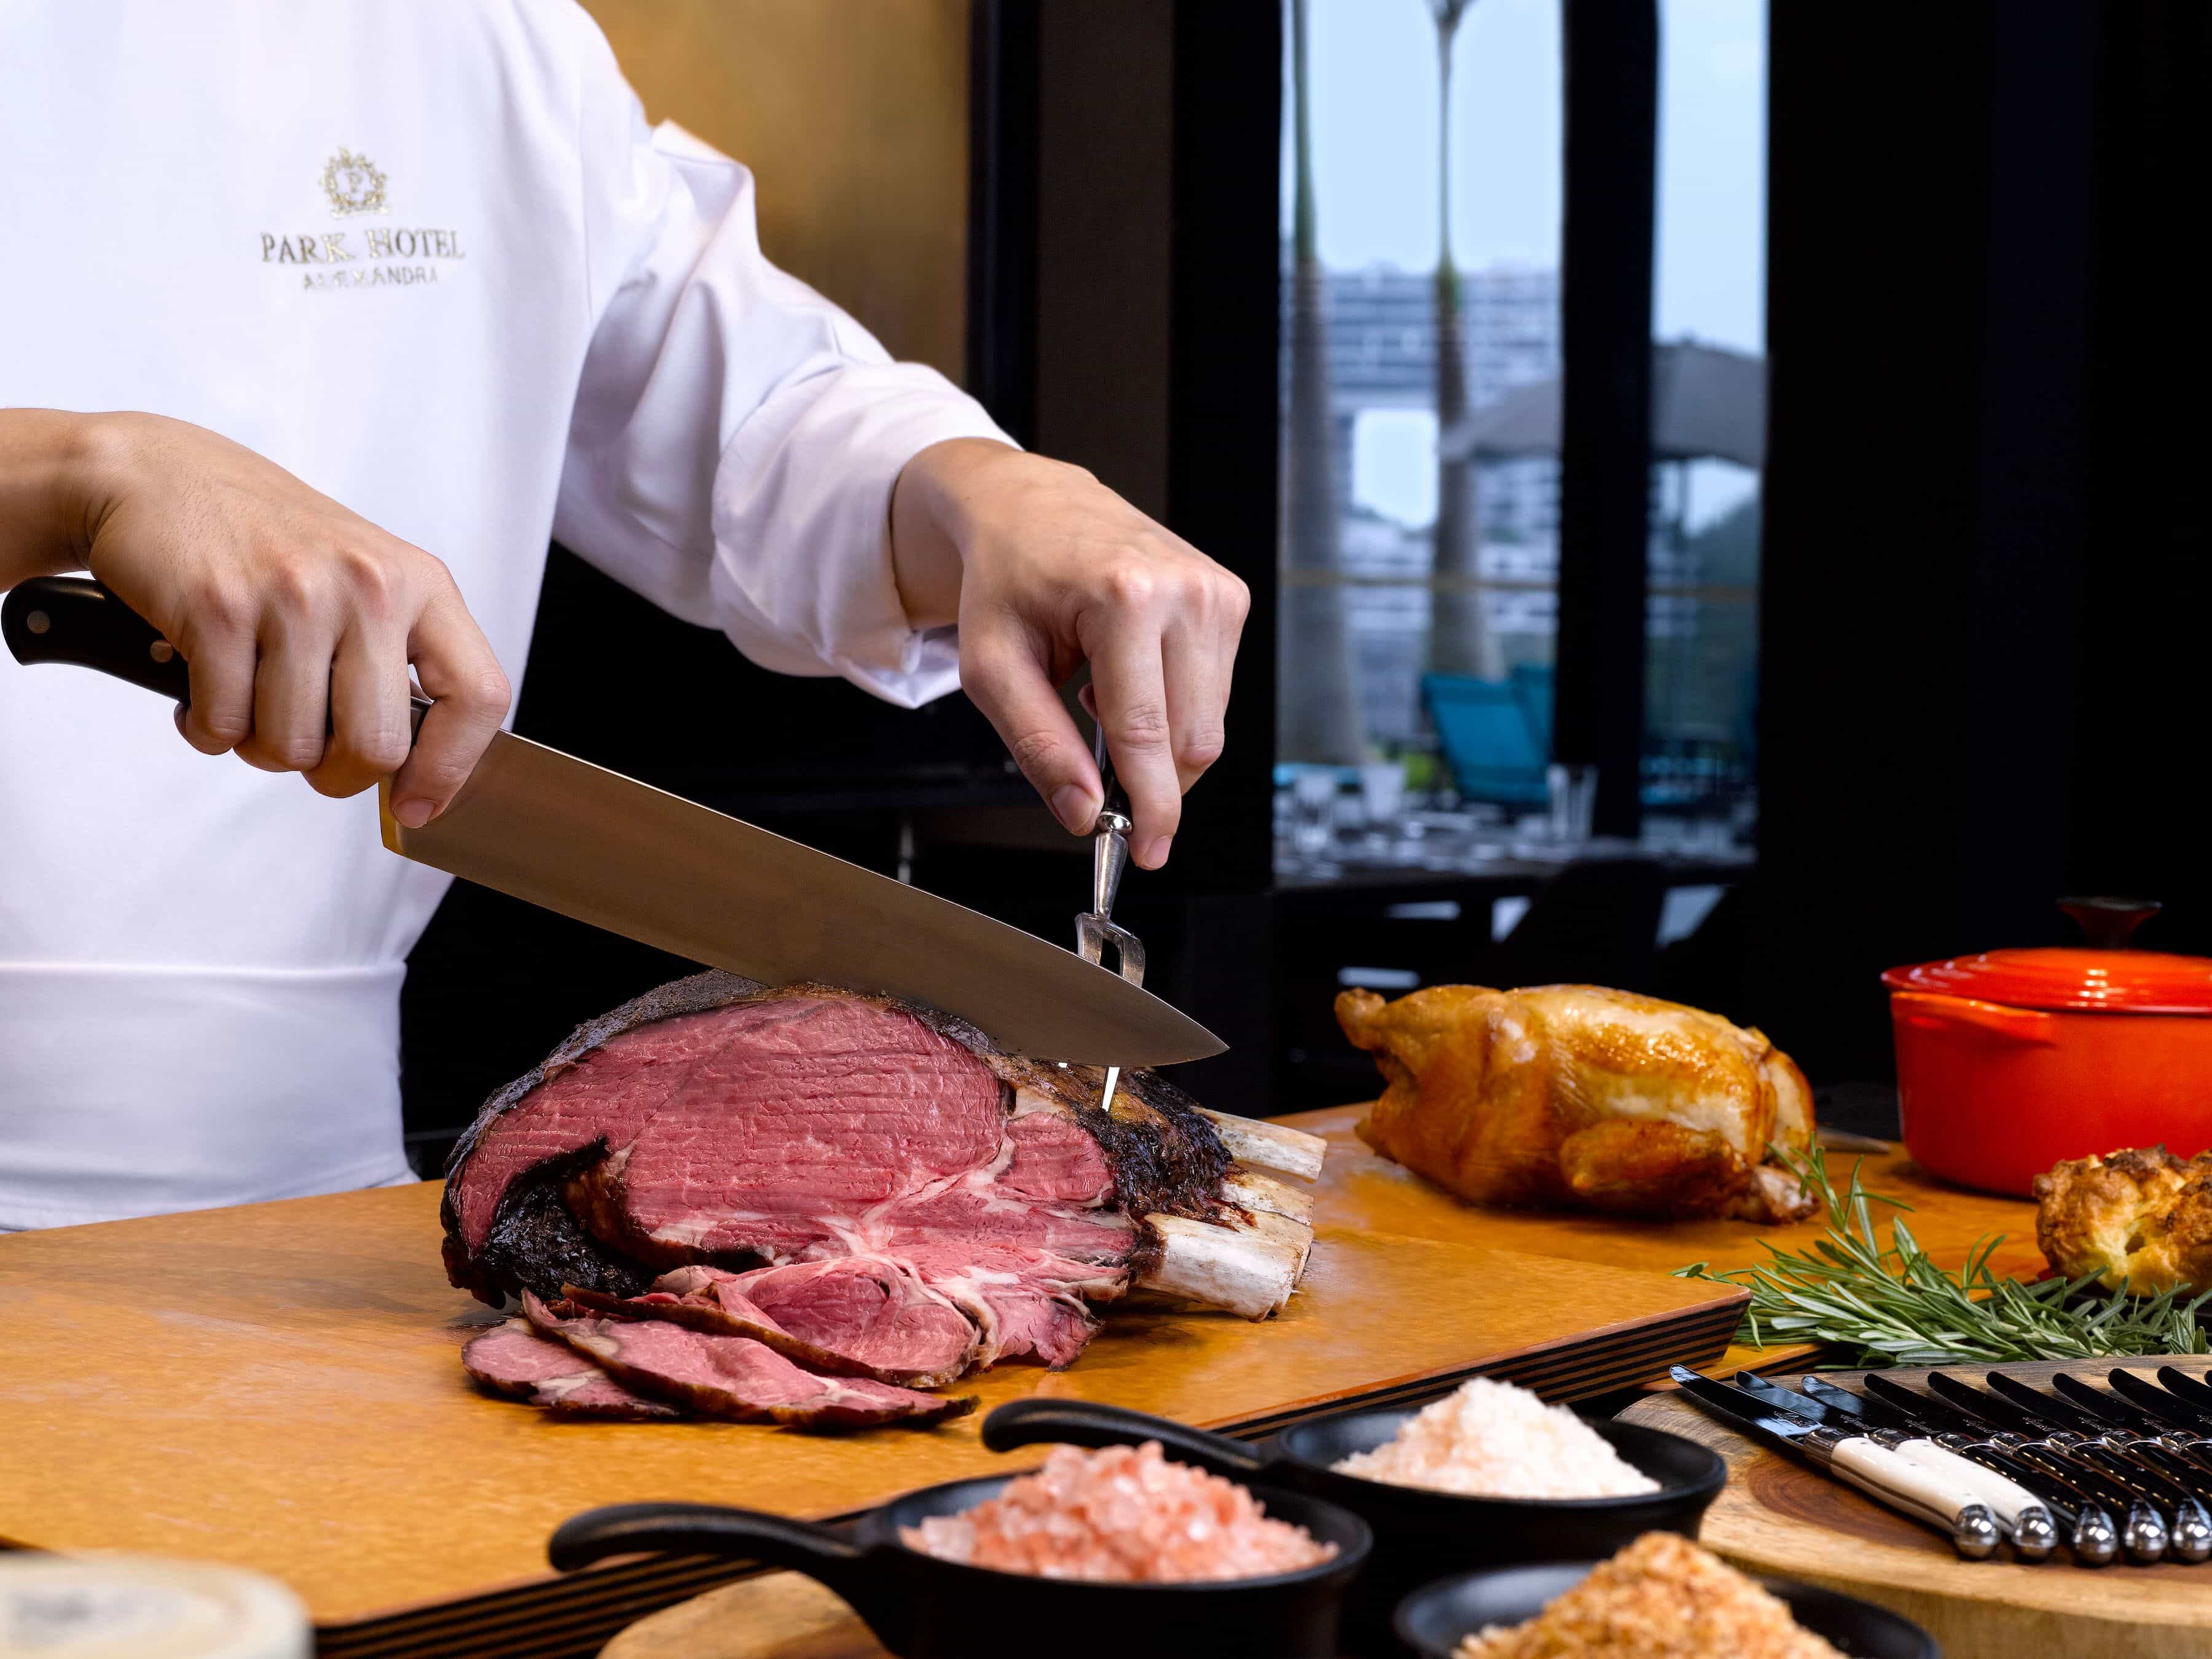 New restaurants in Singapore August 2015 - The Carvery Park Alexandra Hotel Singapore